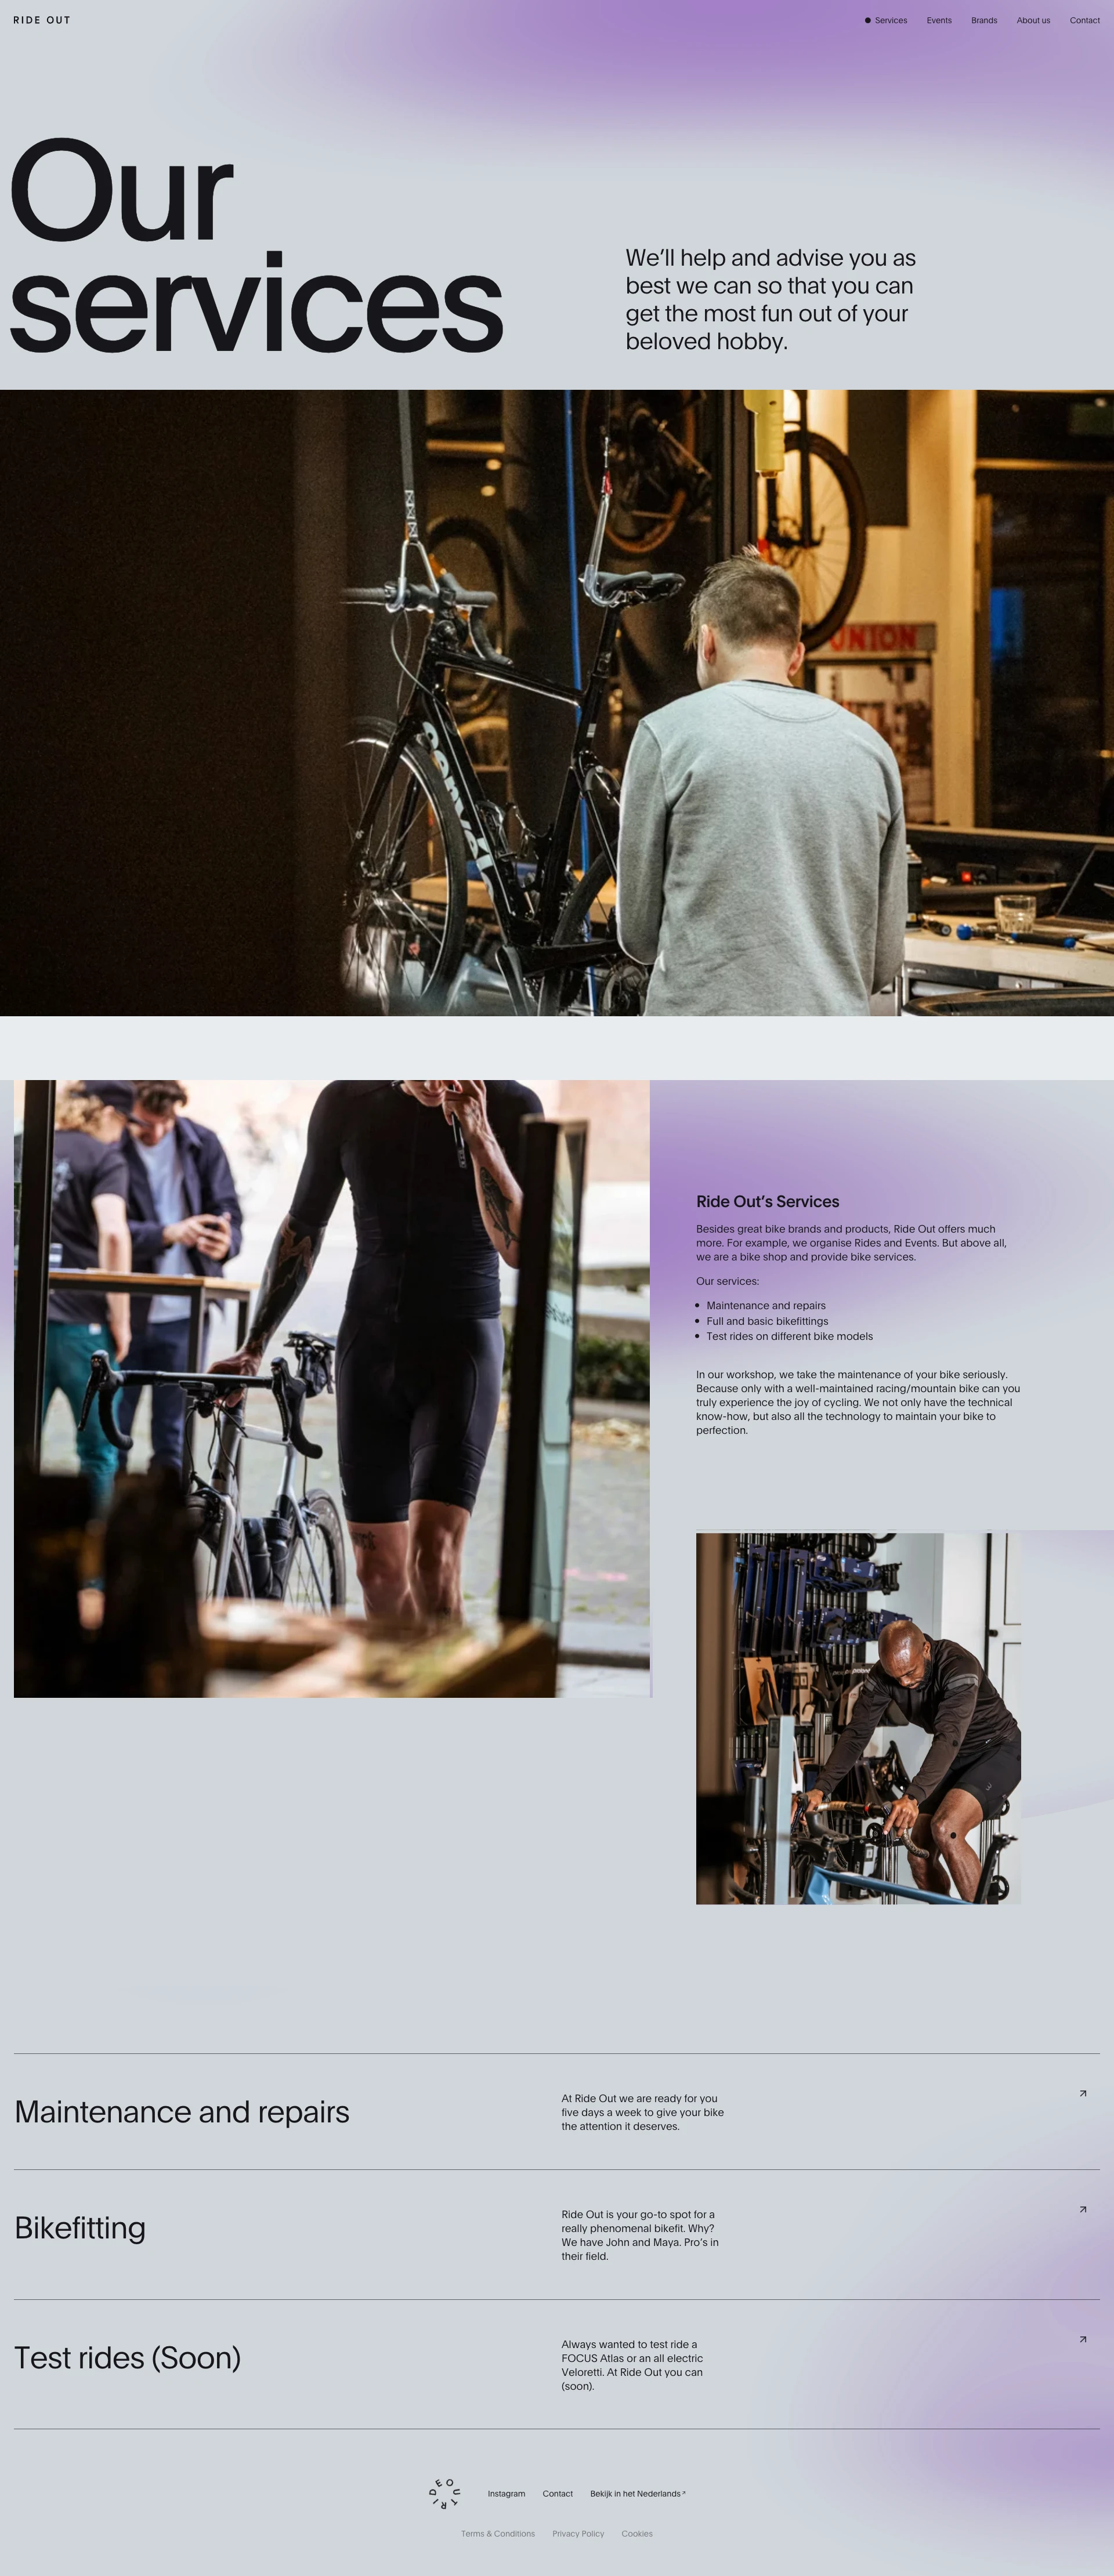 Ride Out Amsterdam Landing Page Example: We’re an experimental place that exists to inspire people to discover their passion for bikes, their cycling tribe and their unique version of freedom.